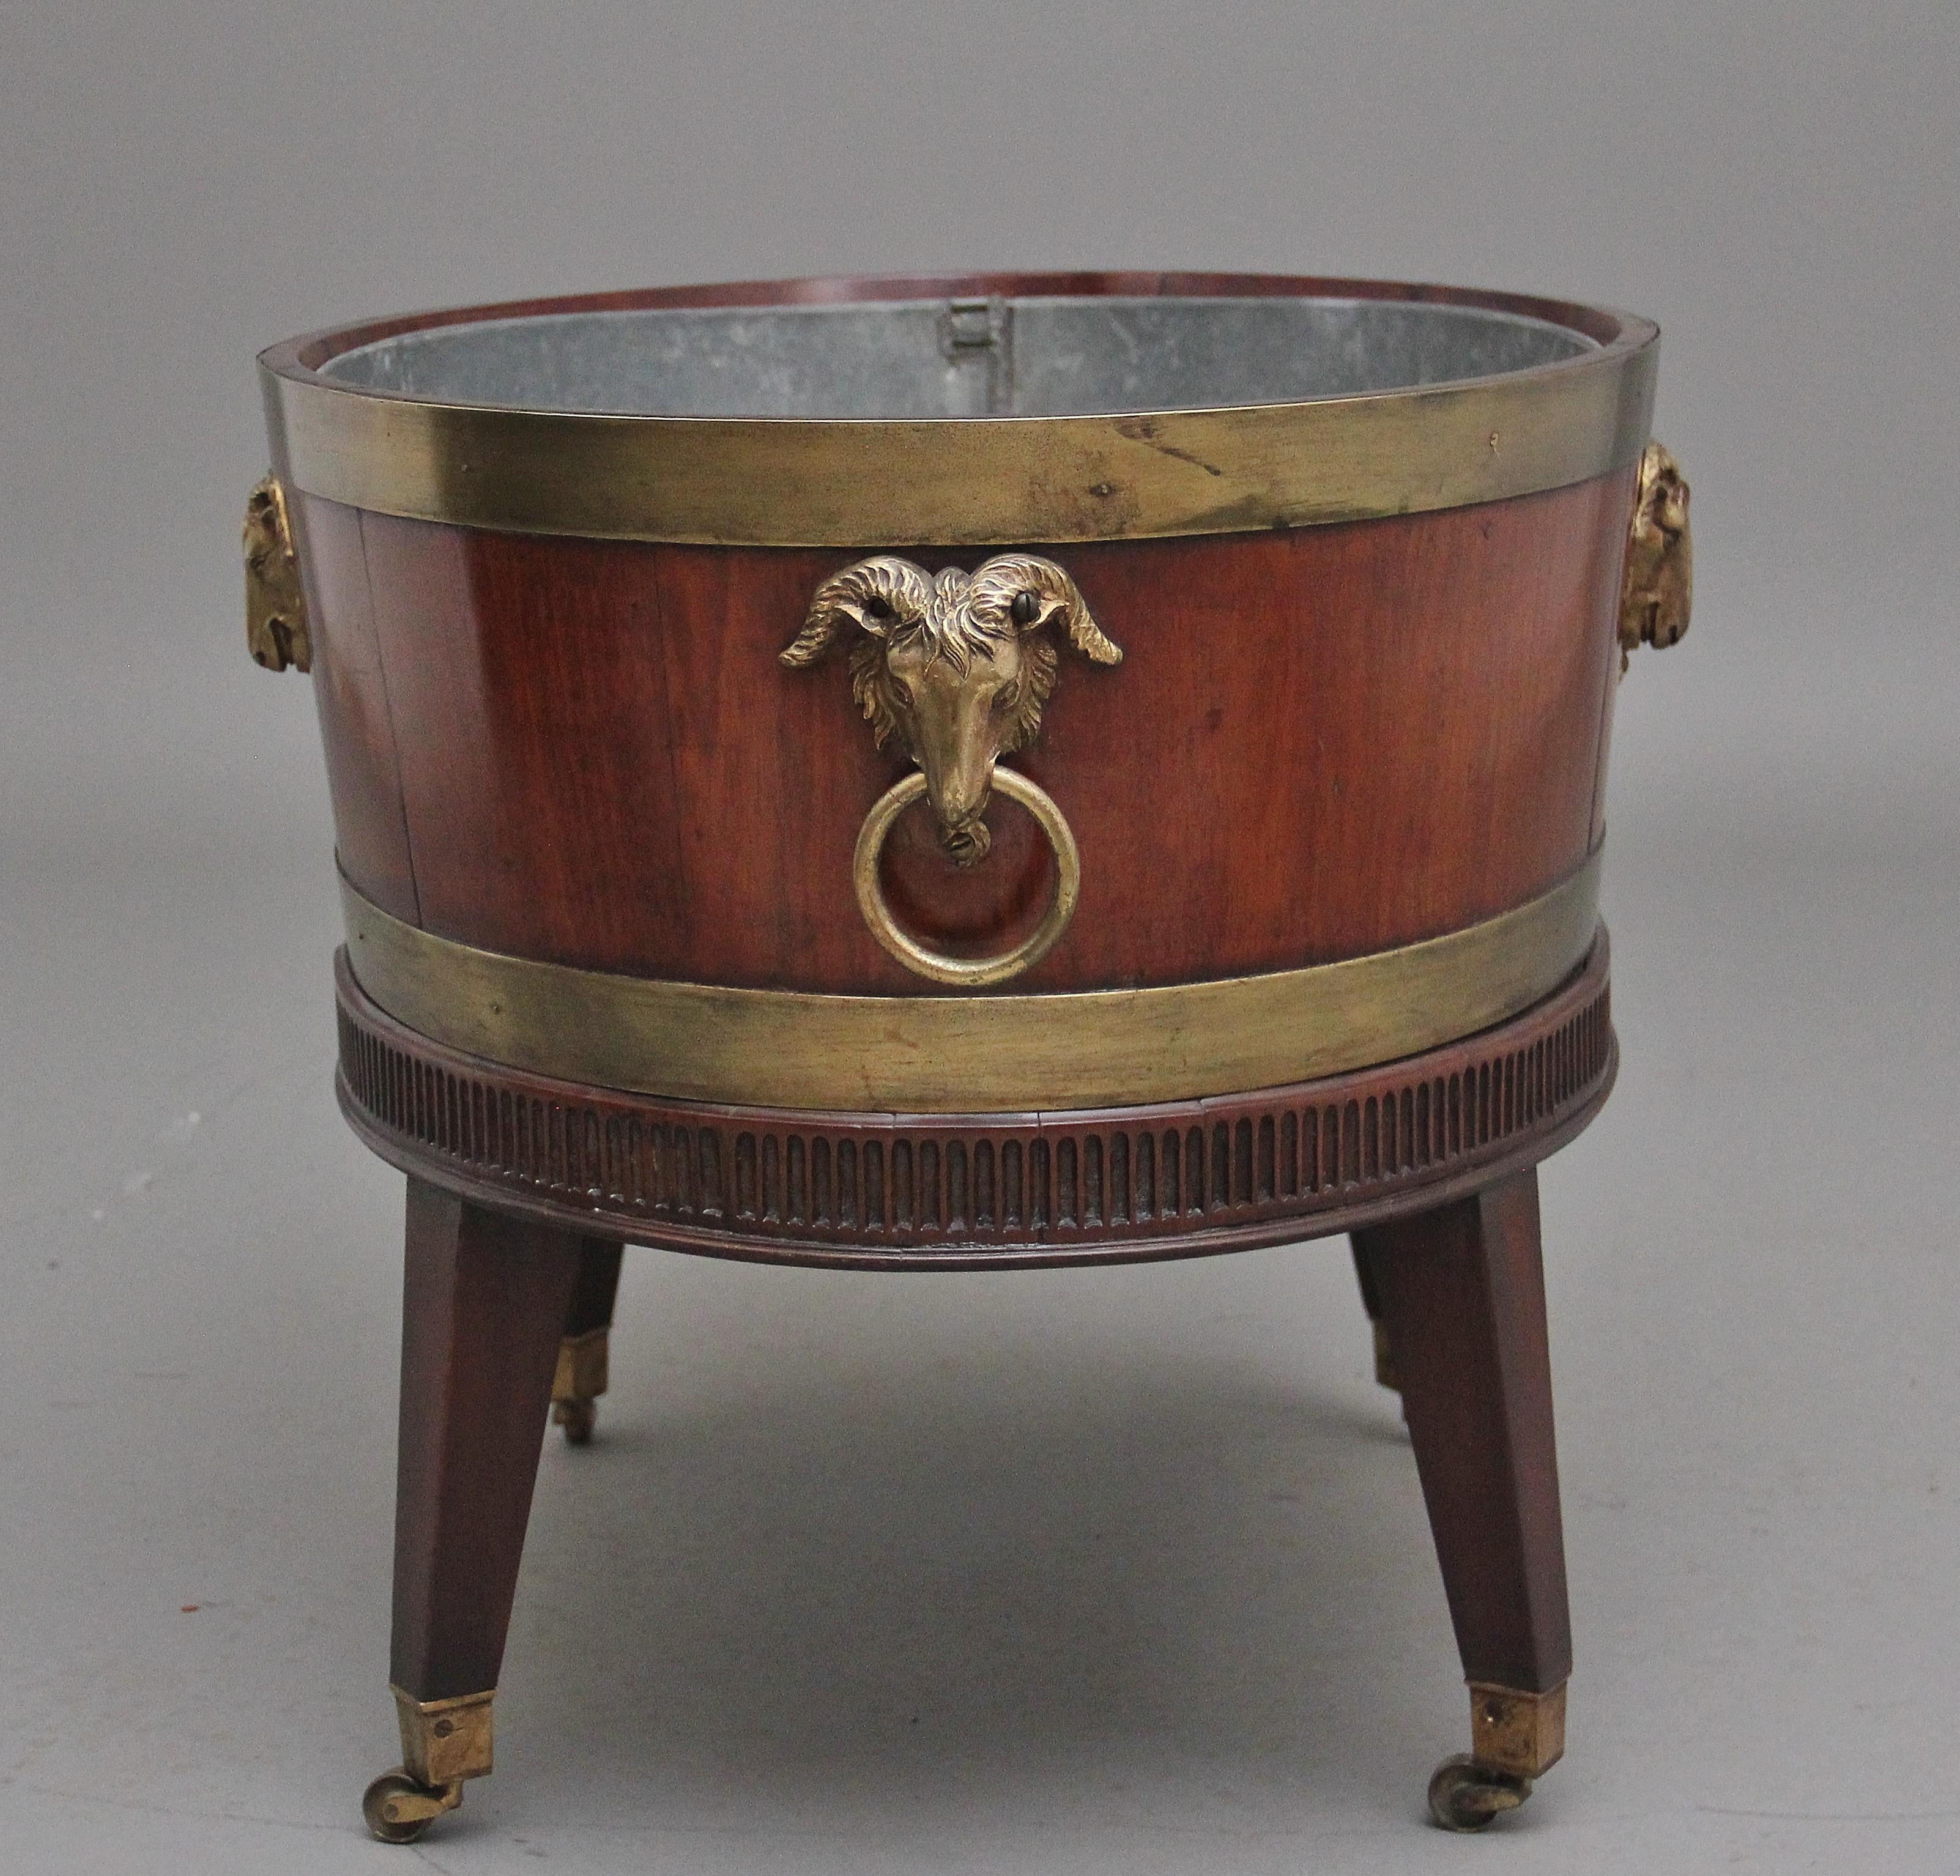 Highly Decorative Early 19th Century Mahogany and Brass Bound Wine Cooler For Sale 2